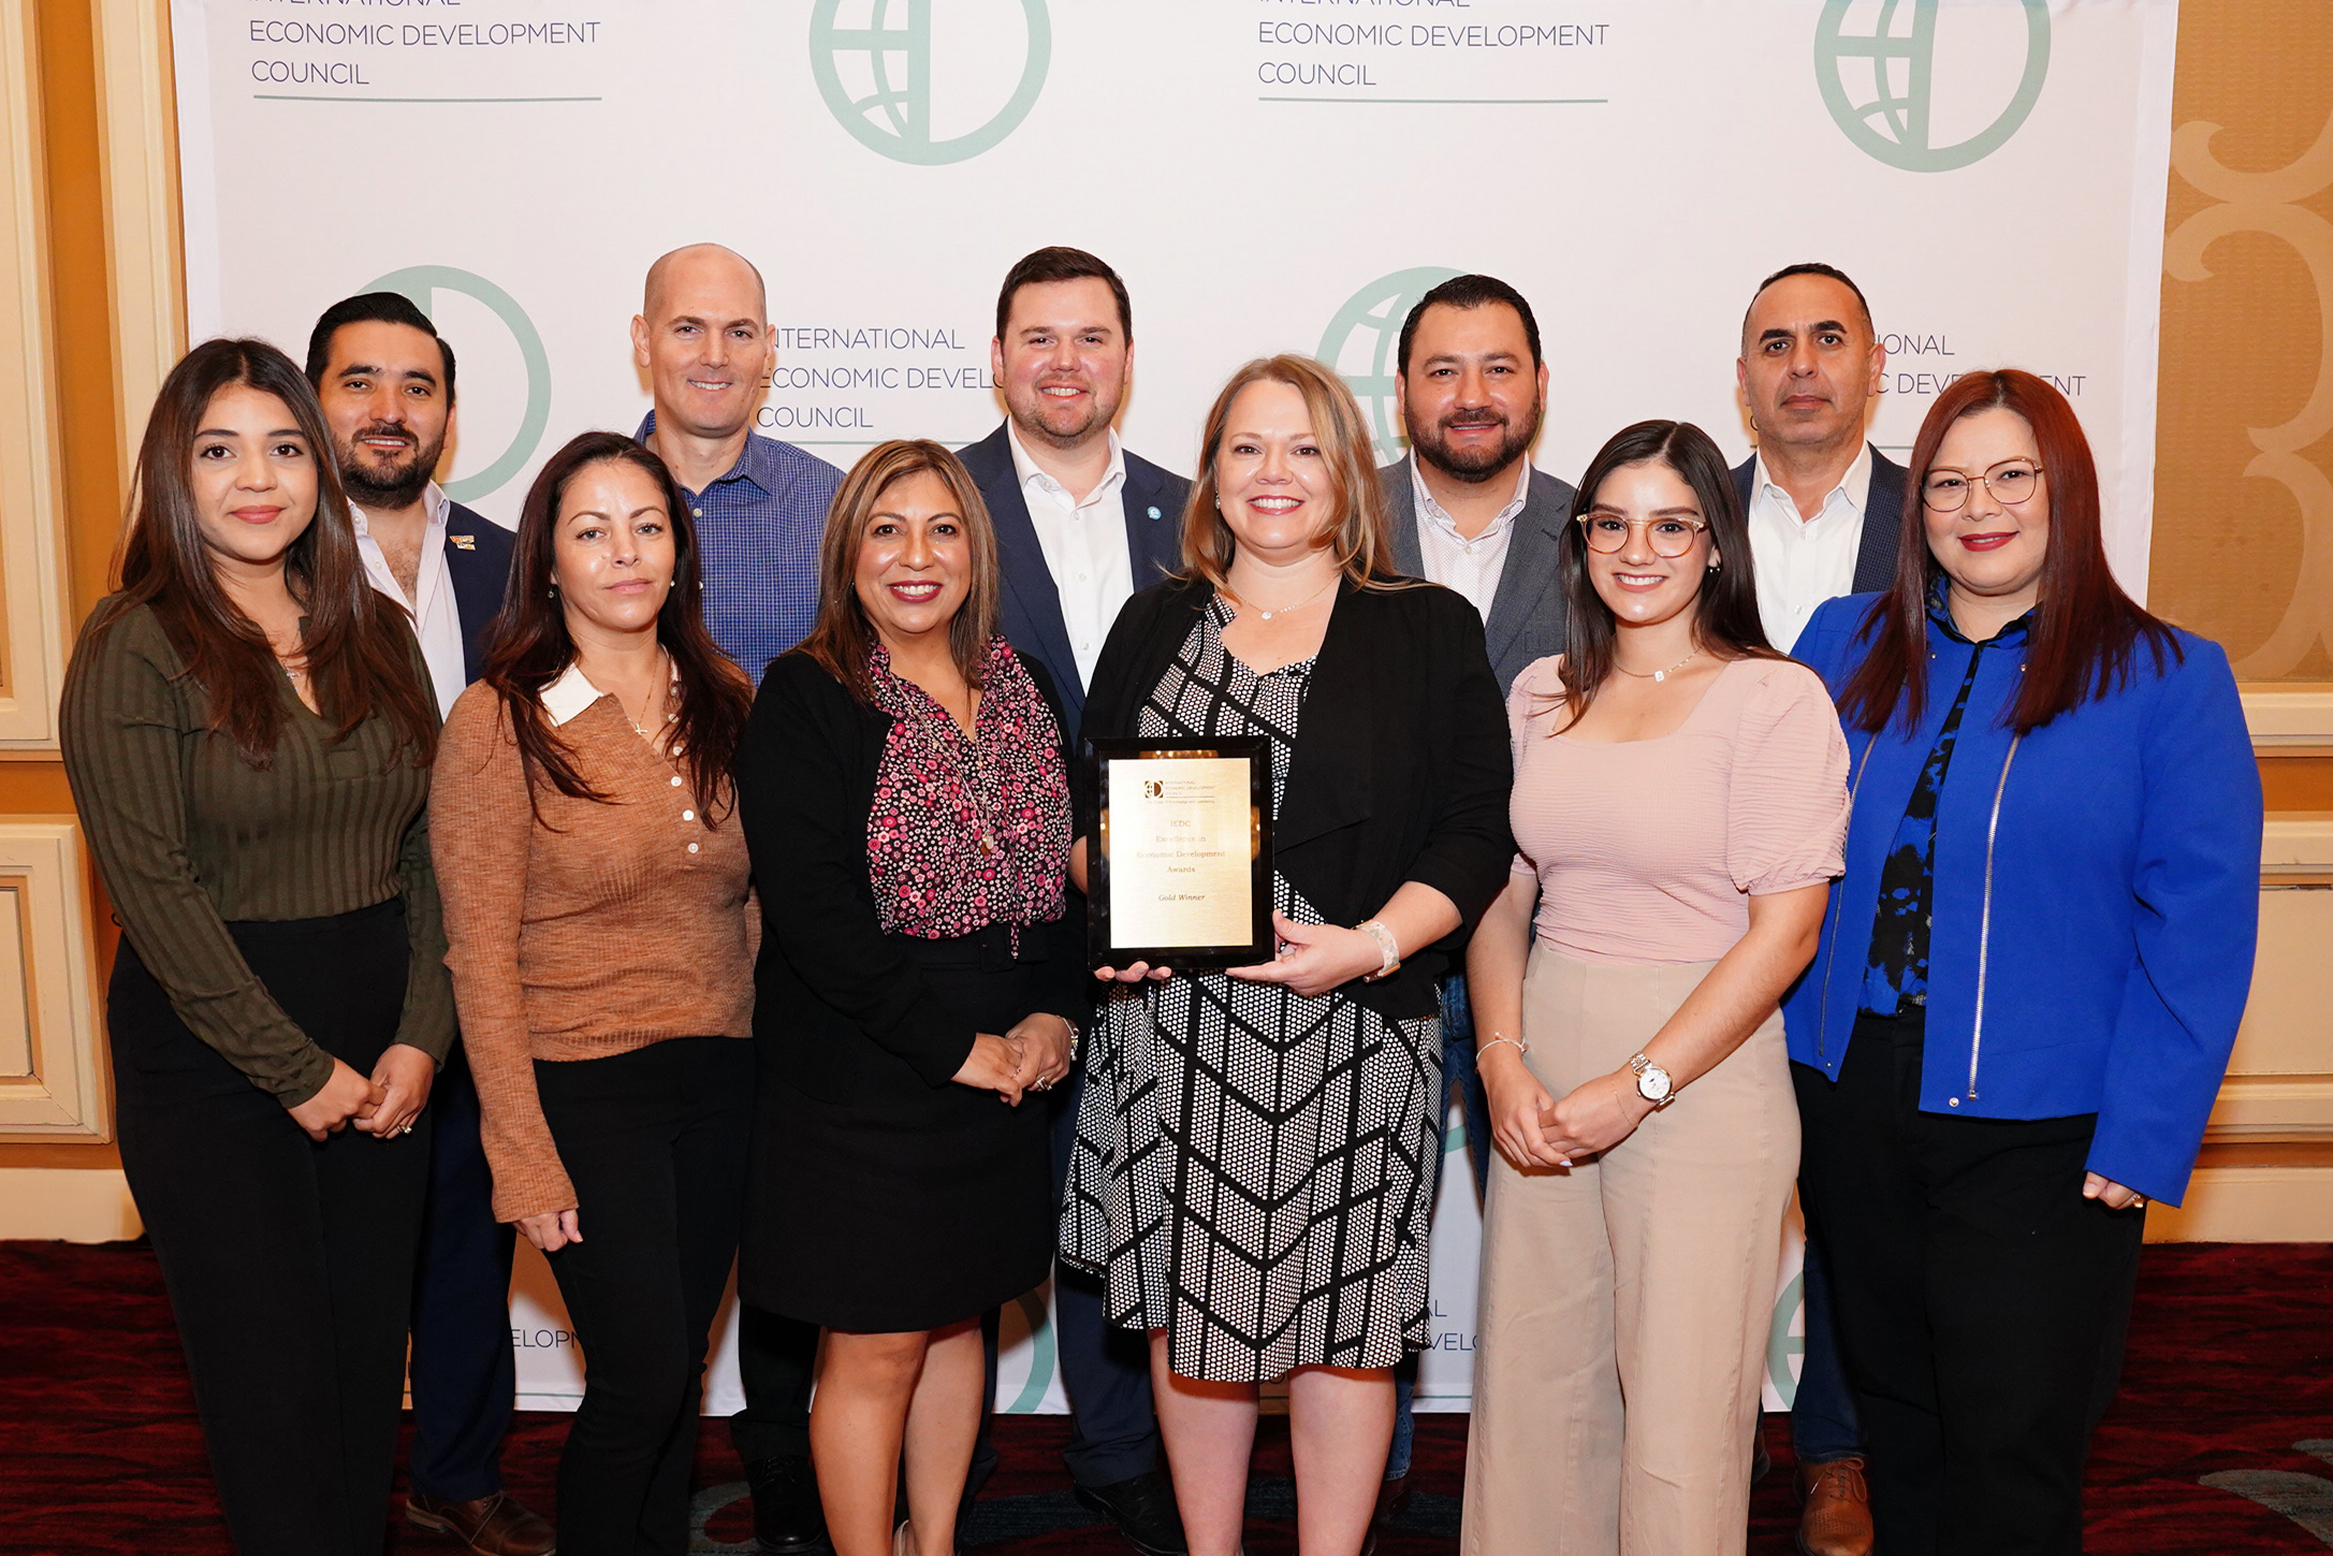 BCIC Honored with International Economic Development Excellence Awards for Three Consecutive Years